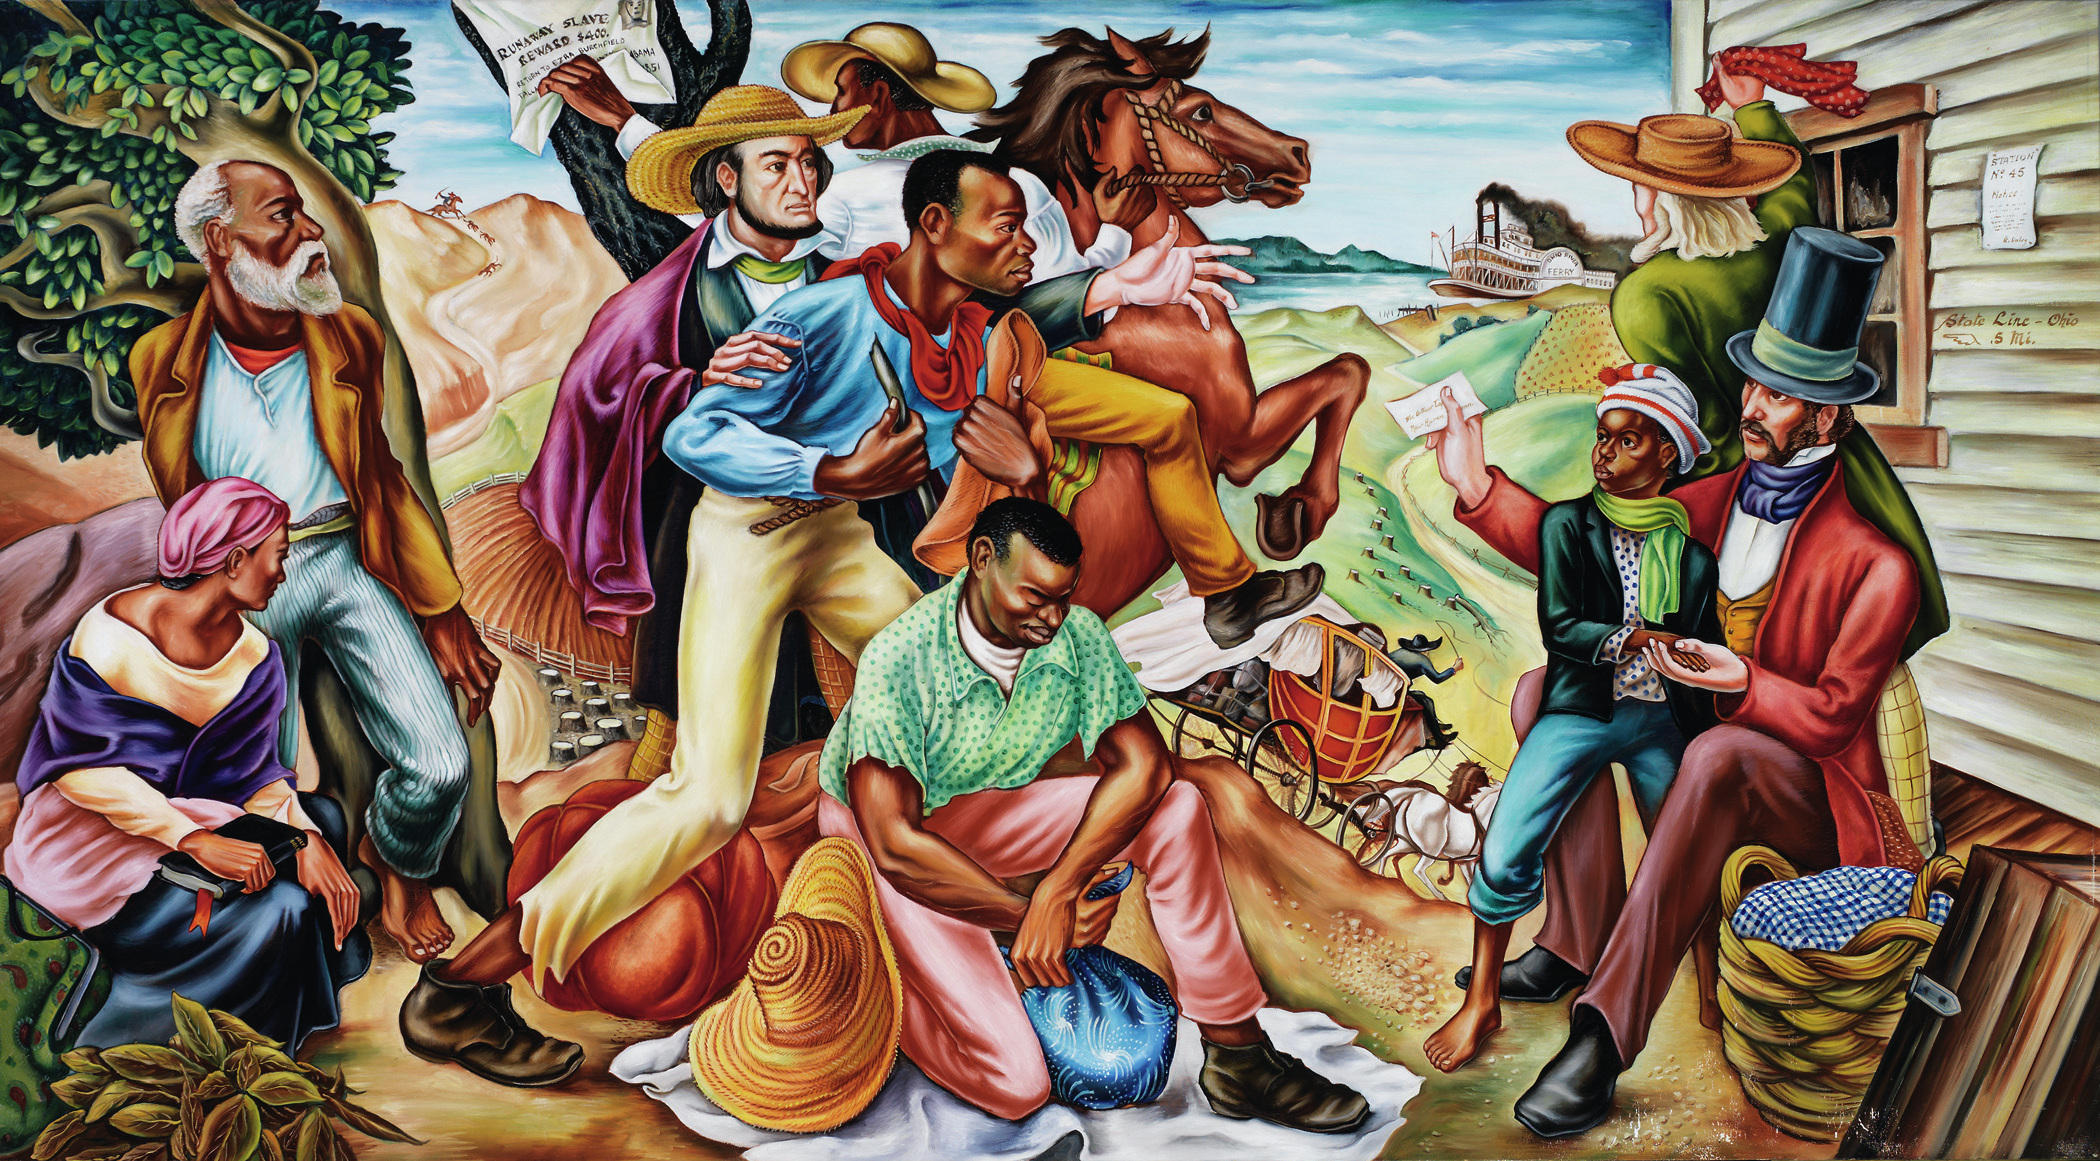 With Powerful Murals, Hale Woodruff Paved The Way For African-American